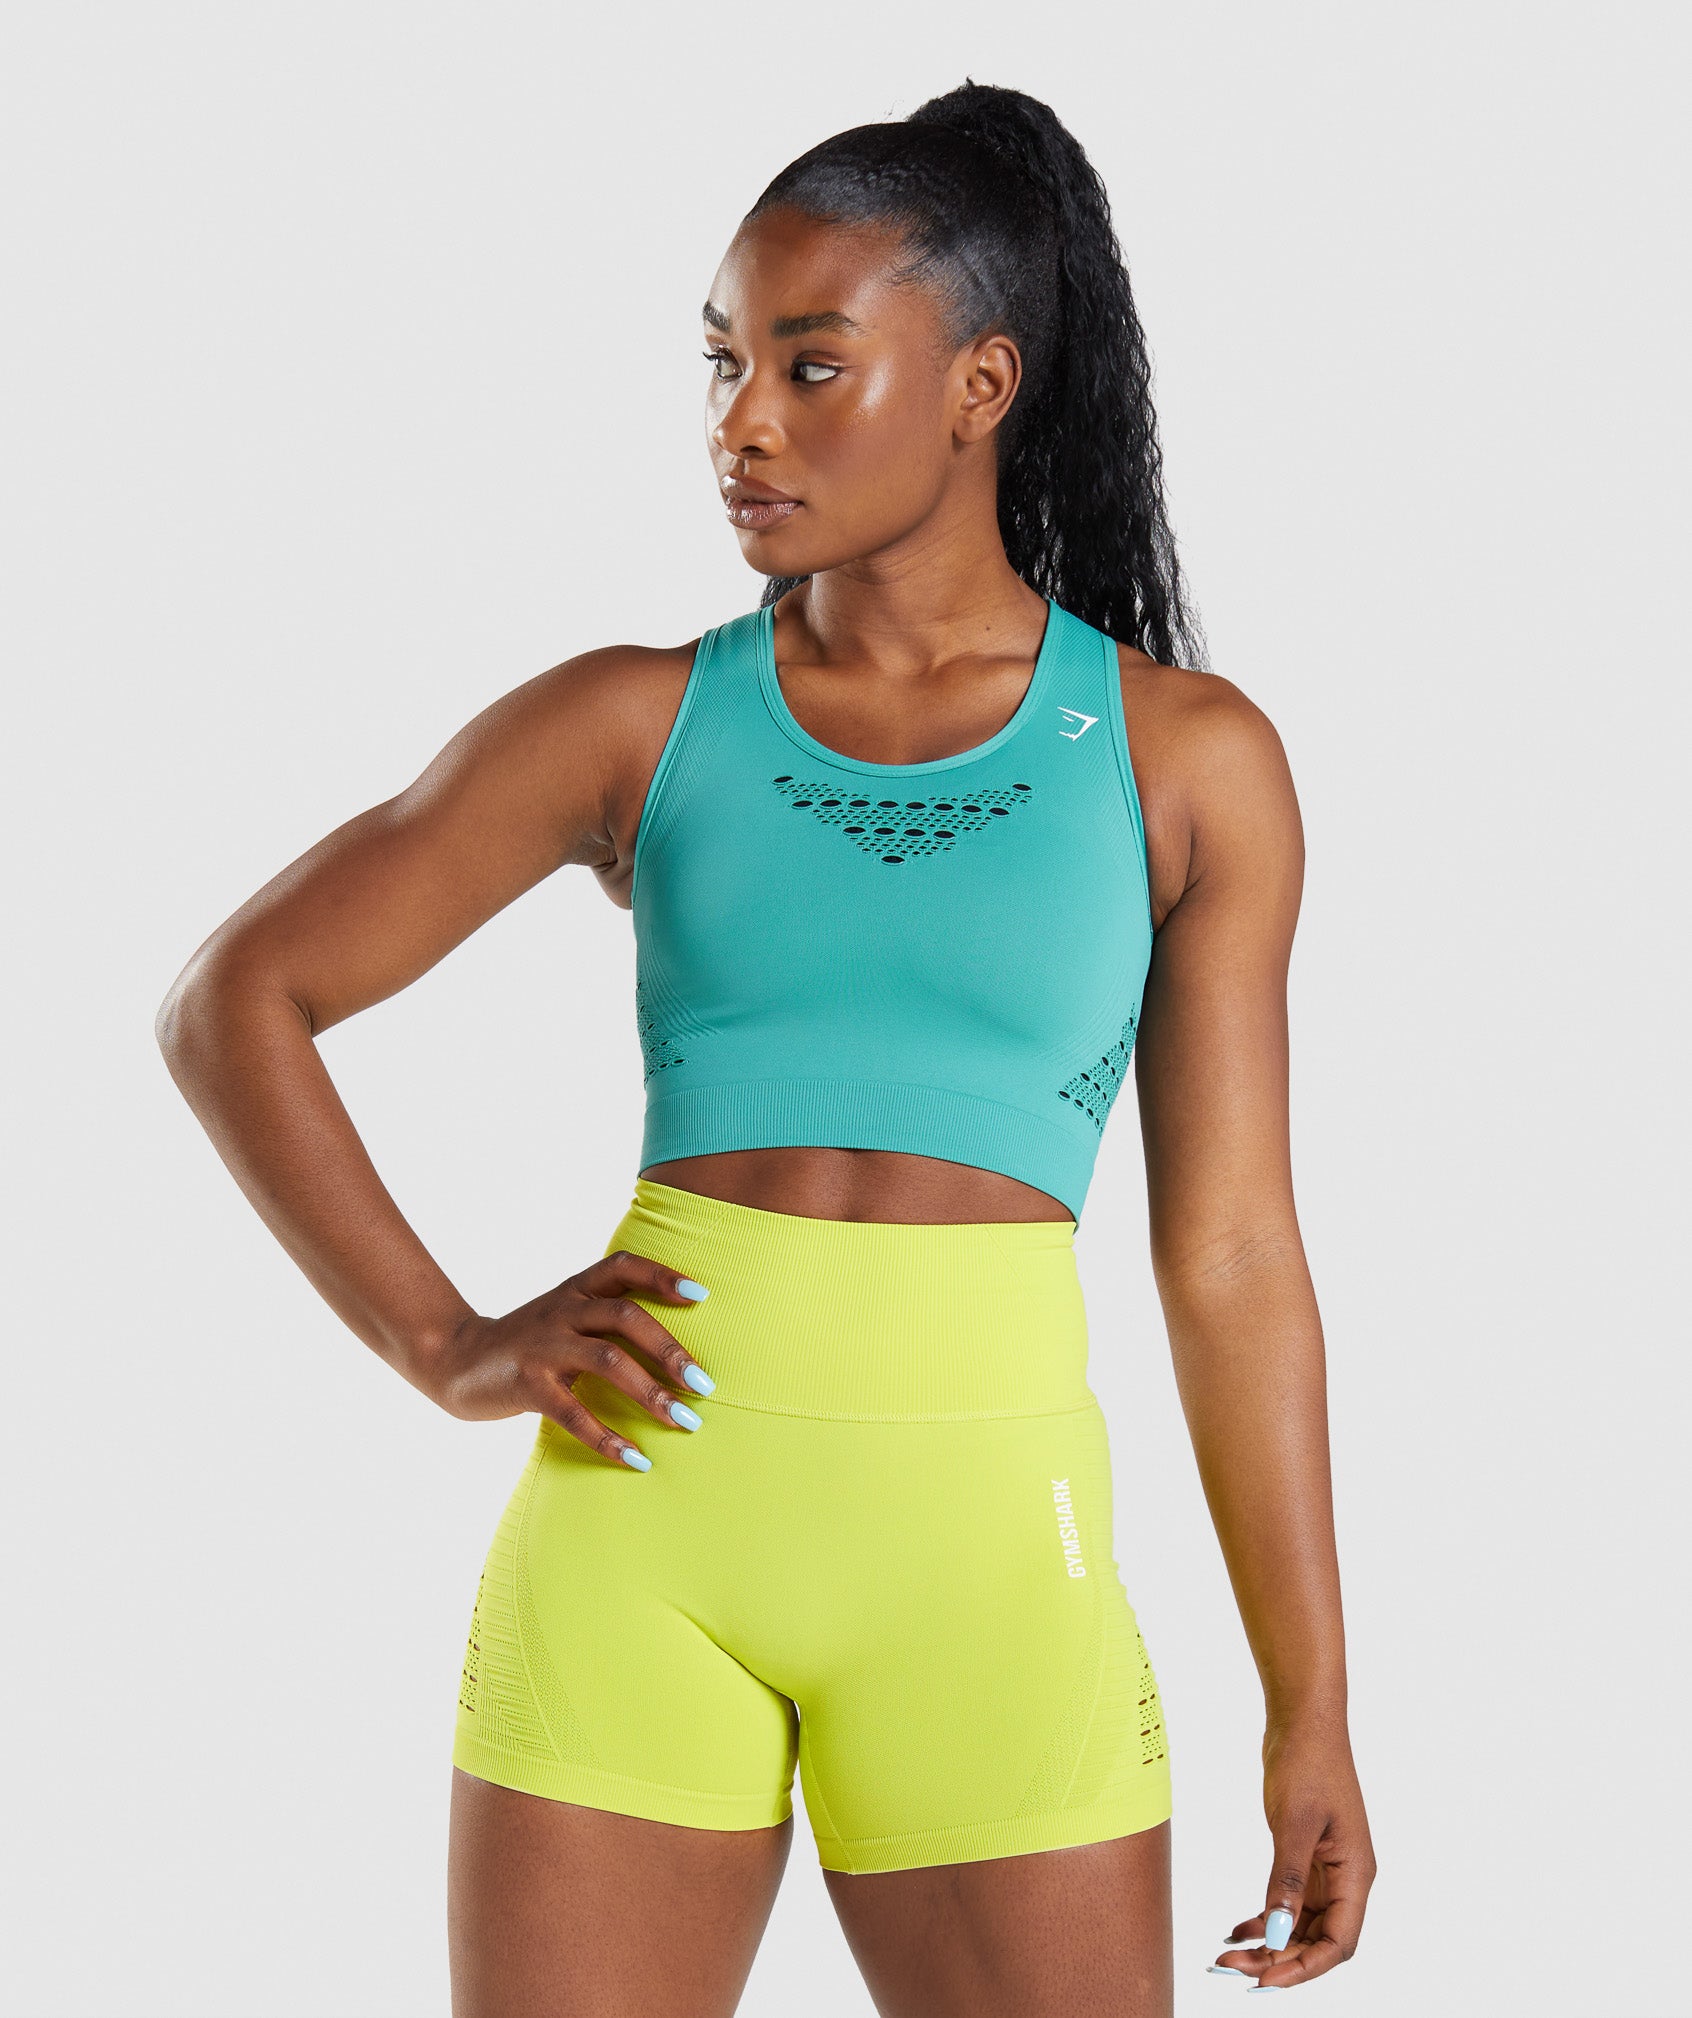 Energy Seamless Crop Top in Fauna Teal - view 1